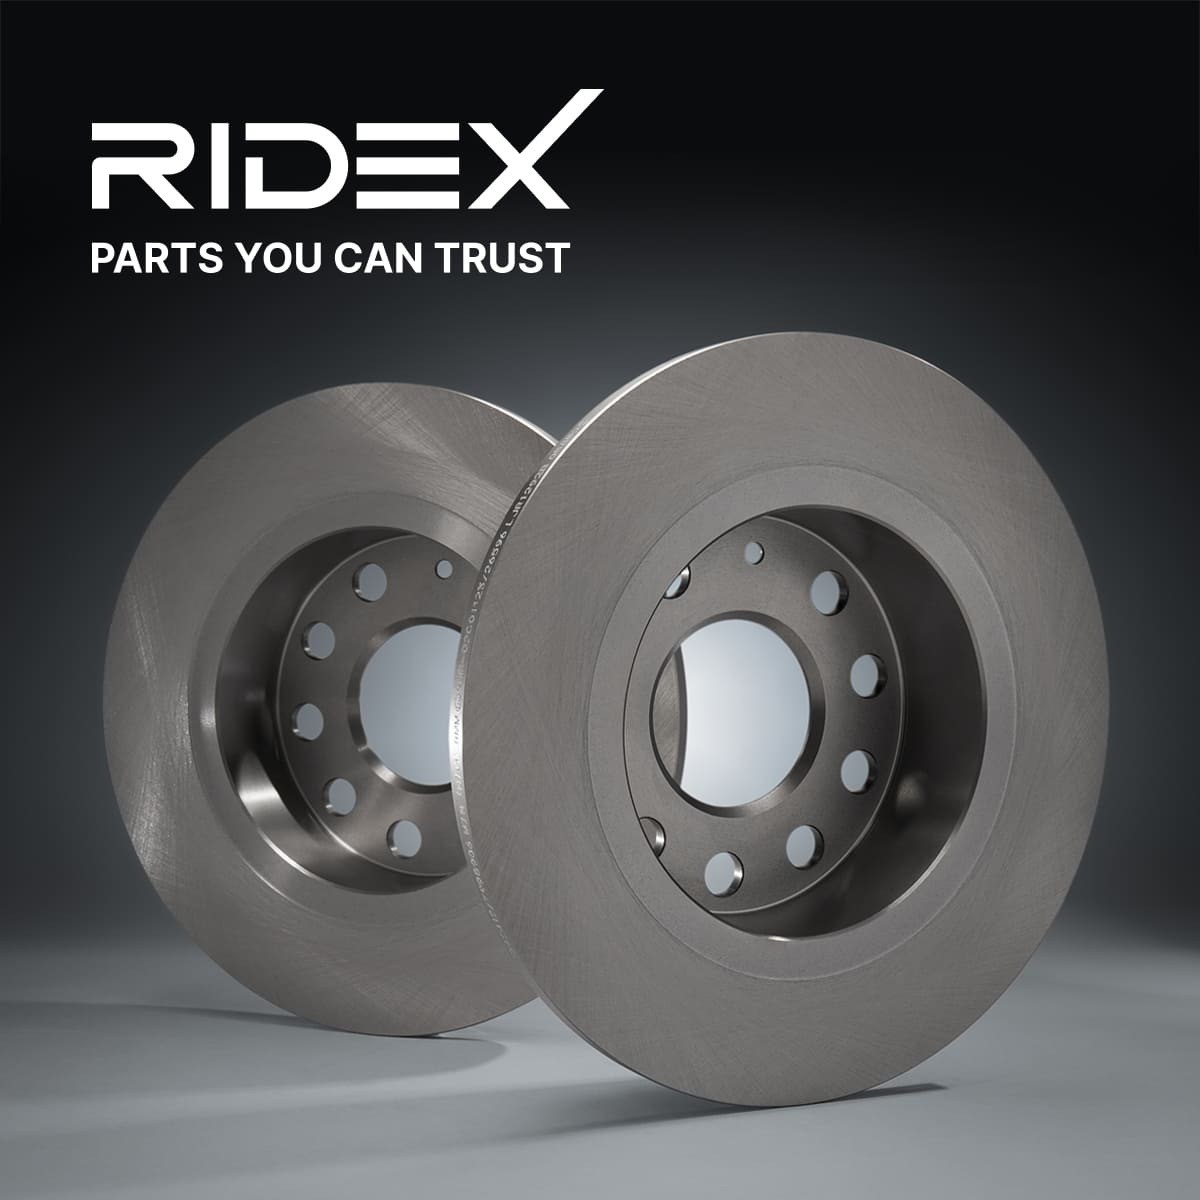 82B0438 Brake discs 82B0438 RIDEX Front Axle, 302,0x21,9, 22mm, 05/07x120, internally vented, Uncoated